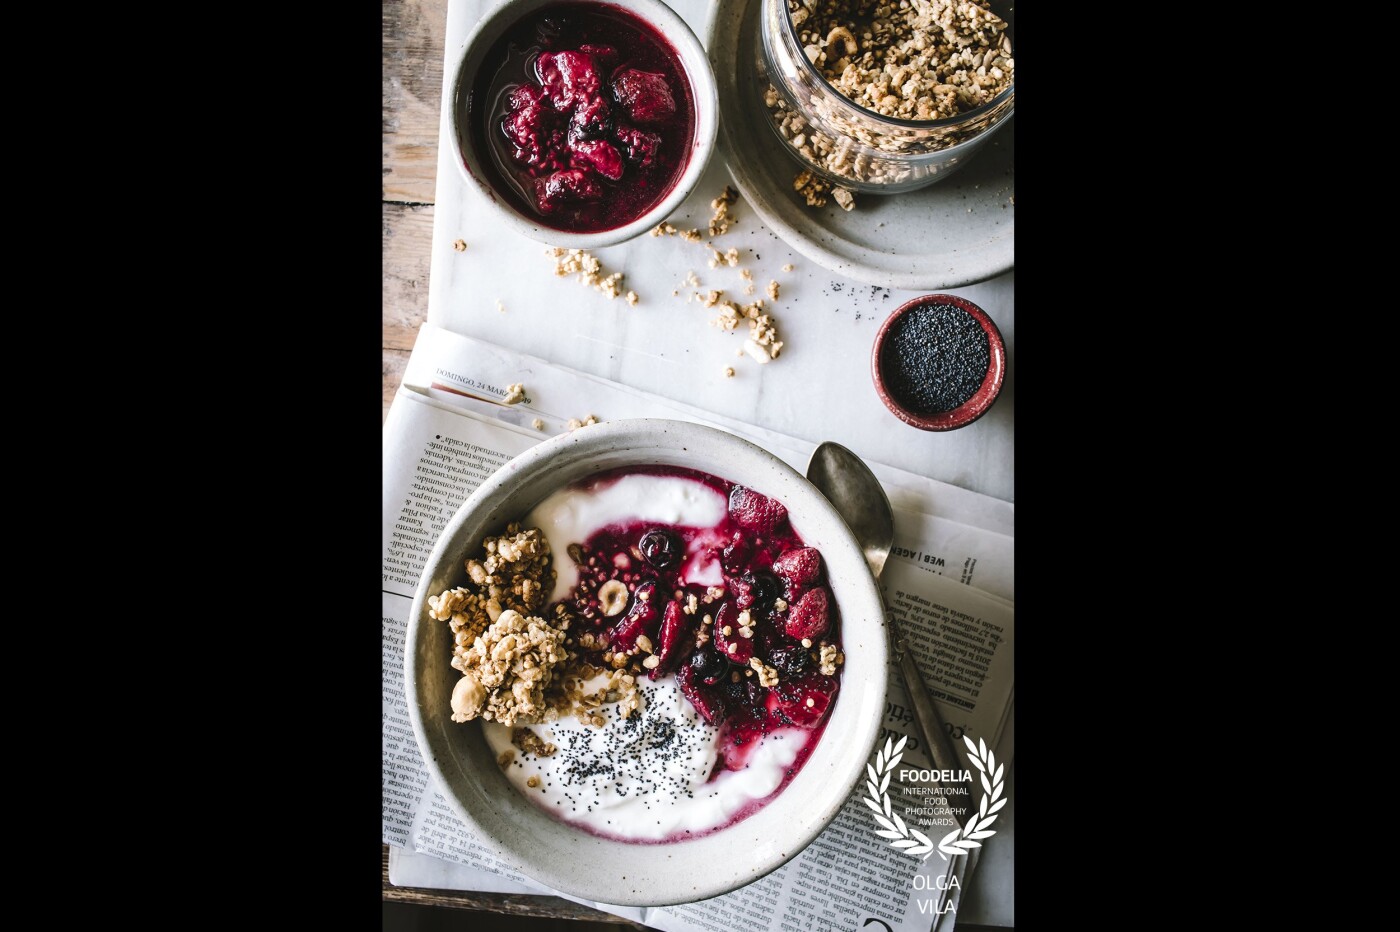 This is a new crunchy granola recipe , served with yoghurt and homemade berries compote. The shot is made with a Canon 80D, 24mm lens, ISO 320. 1/8 seconds,  f6,3